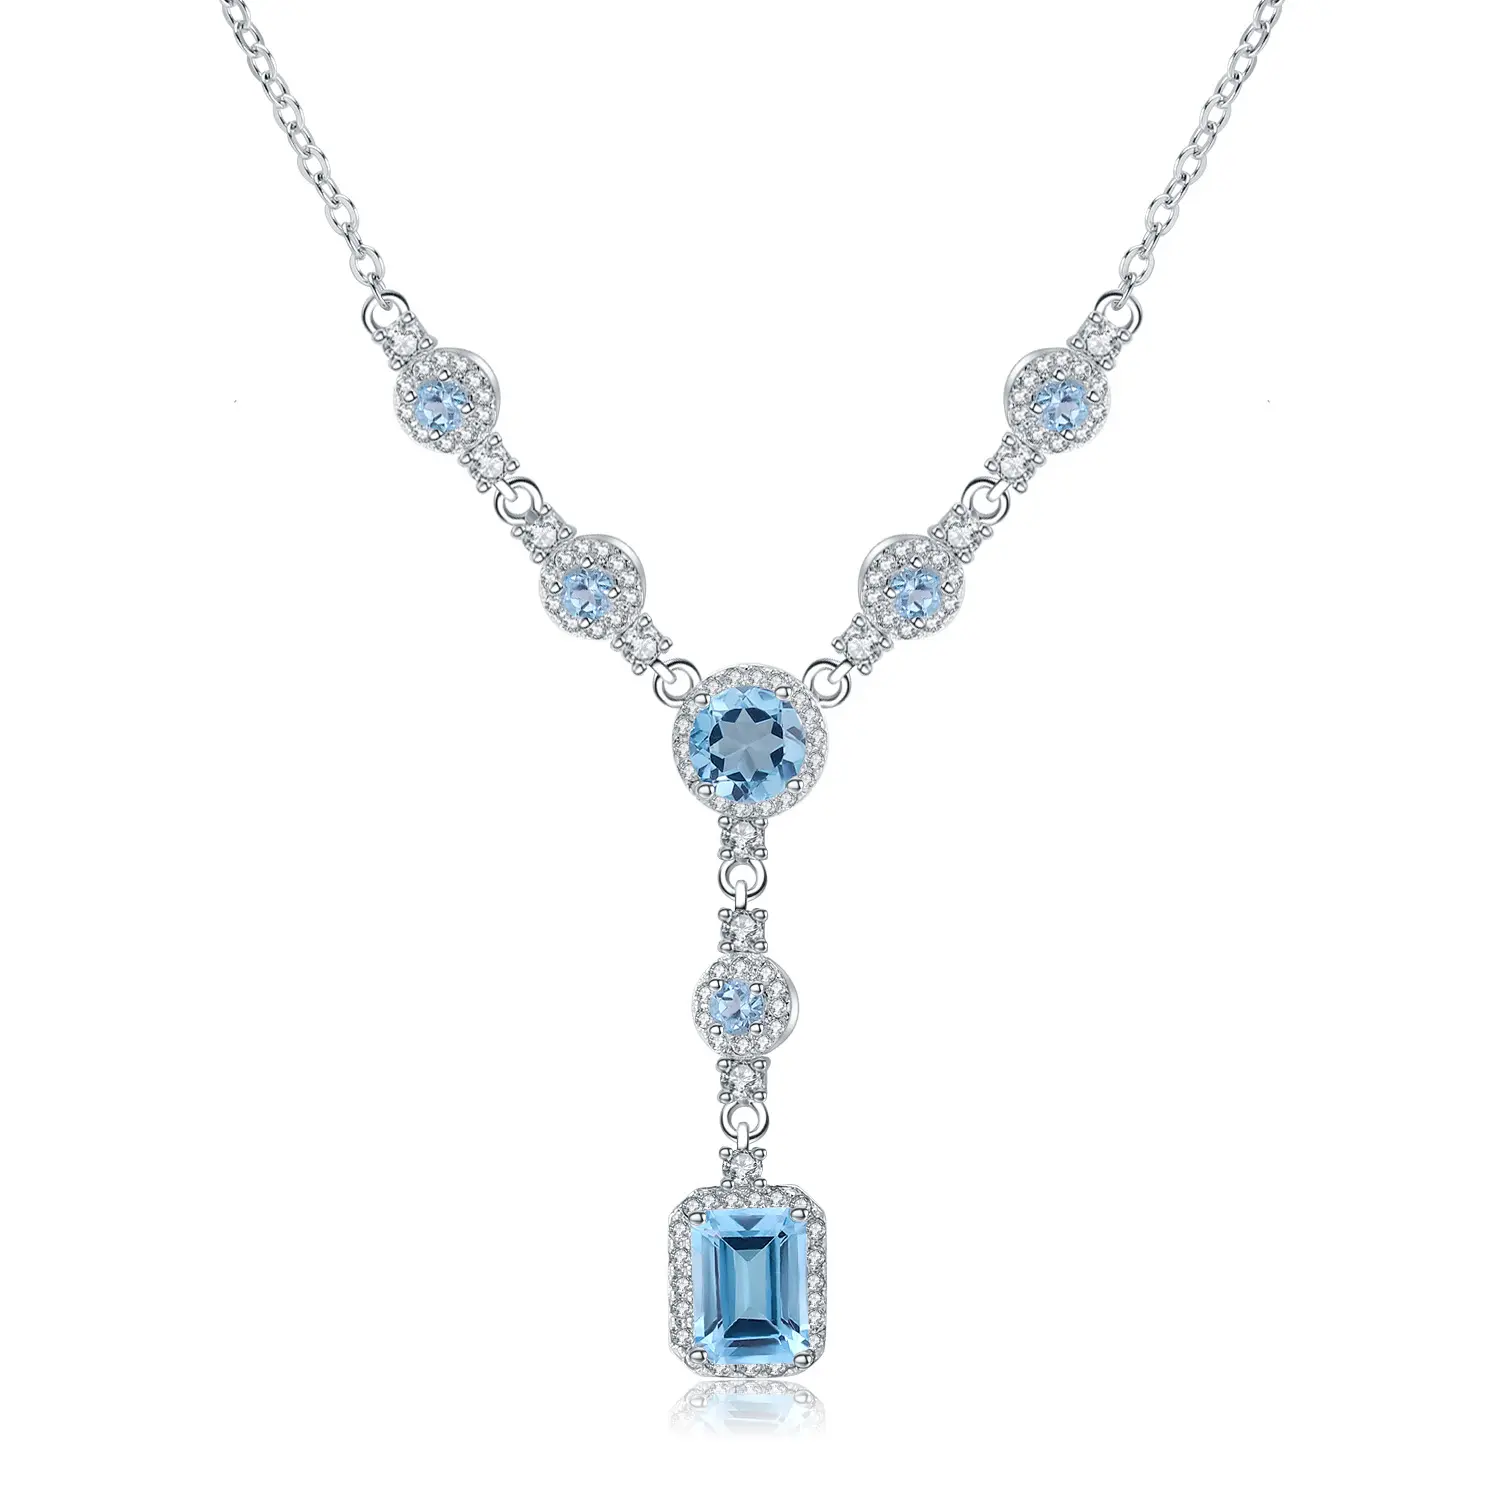 Lerca Fashion Gemstone Necklace Lady Chain Natural Topaz Necklace 925 Sterling Silver Luxury Jewelry Pendant Necklace